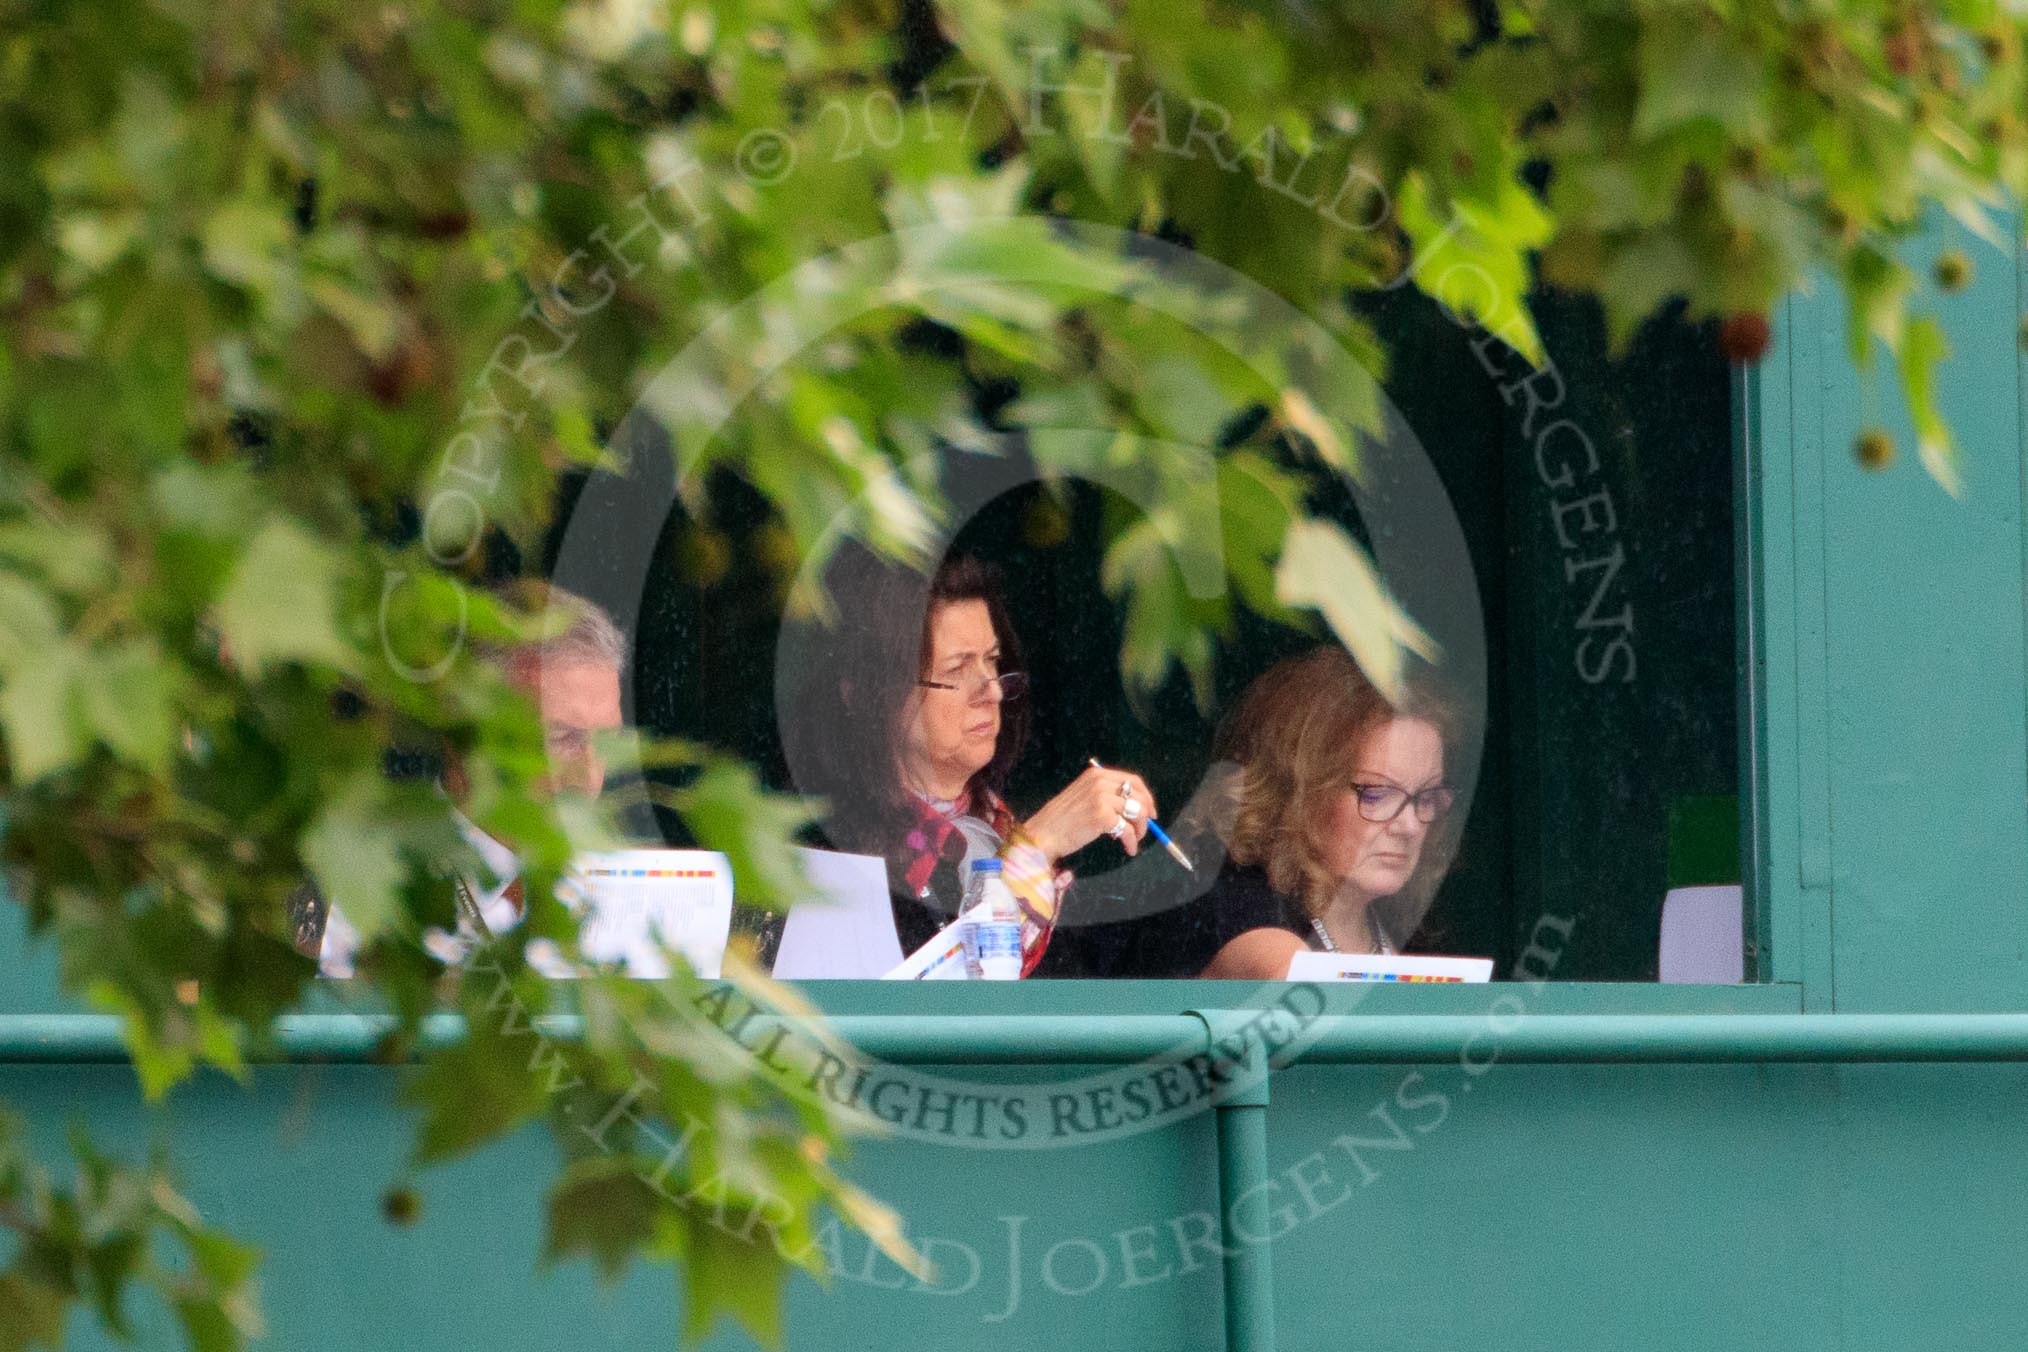 during The Colonel's Review {iptcyear4} (final rehearsal for Trooping the Colour, The Queen's Birthday Parade)  at Horse Guards Parade, Westminster, London, 2 June 2018, 10:49.